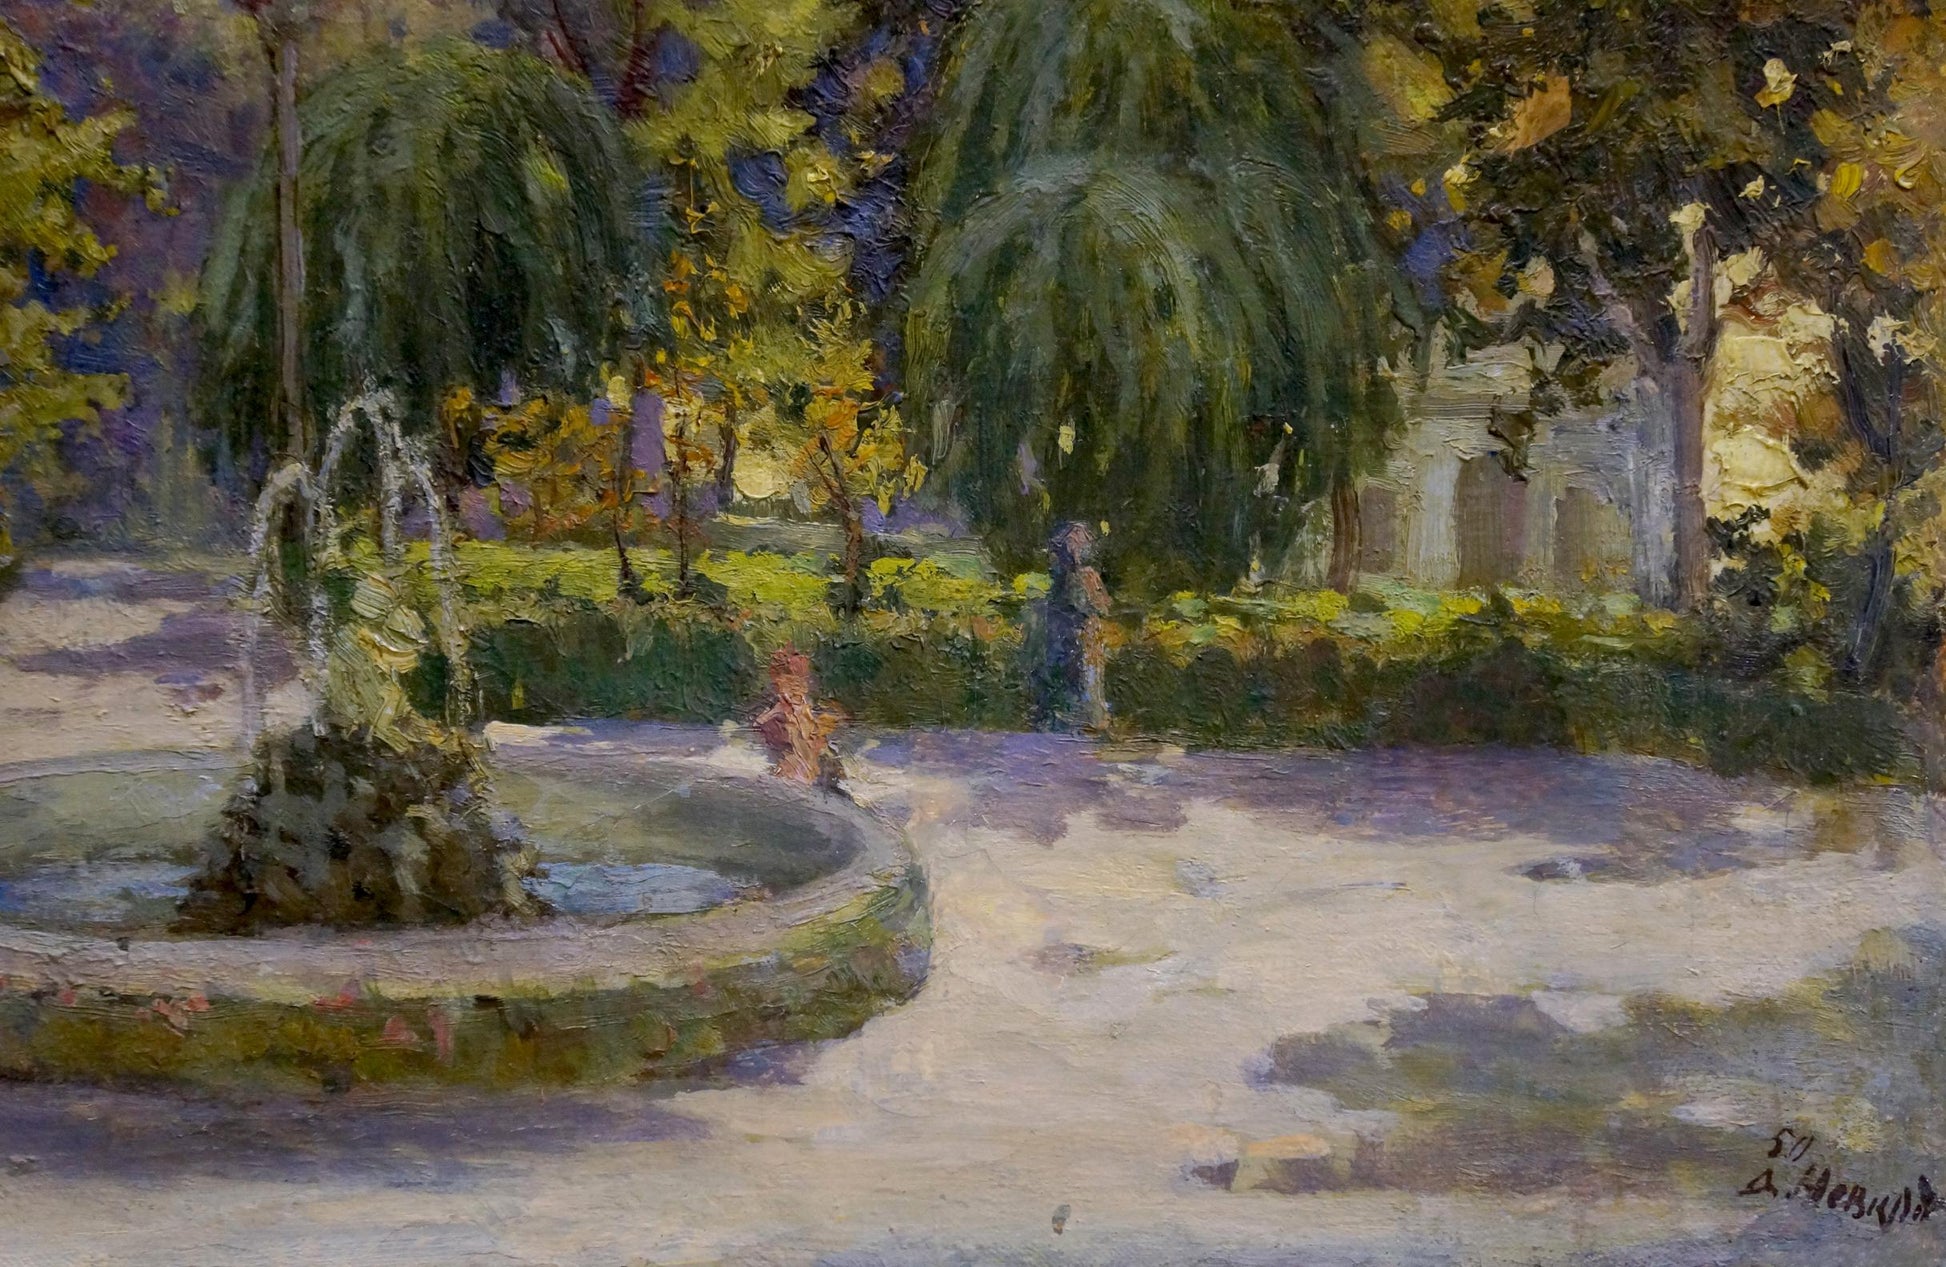 A park scene brought to life in oil by Nevkrytyy Denys Nykyforovych